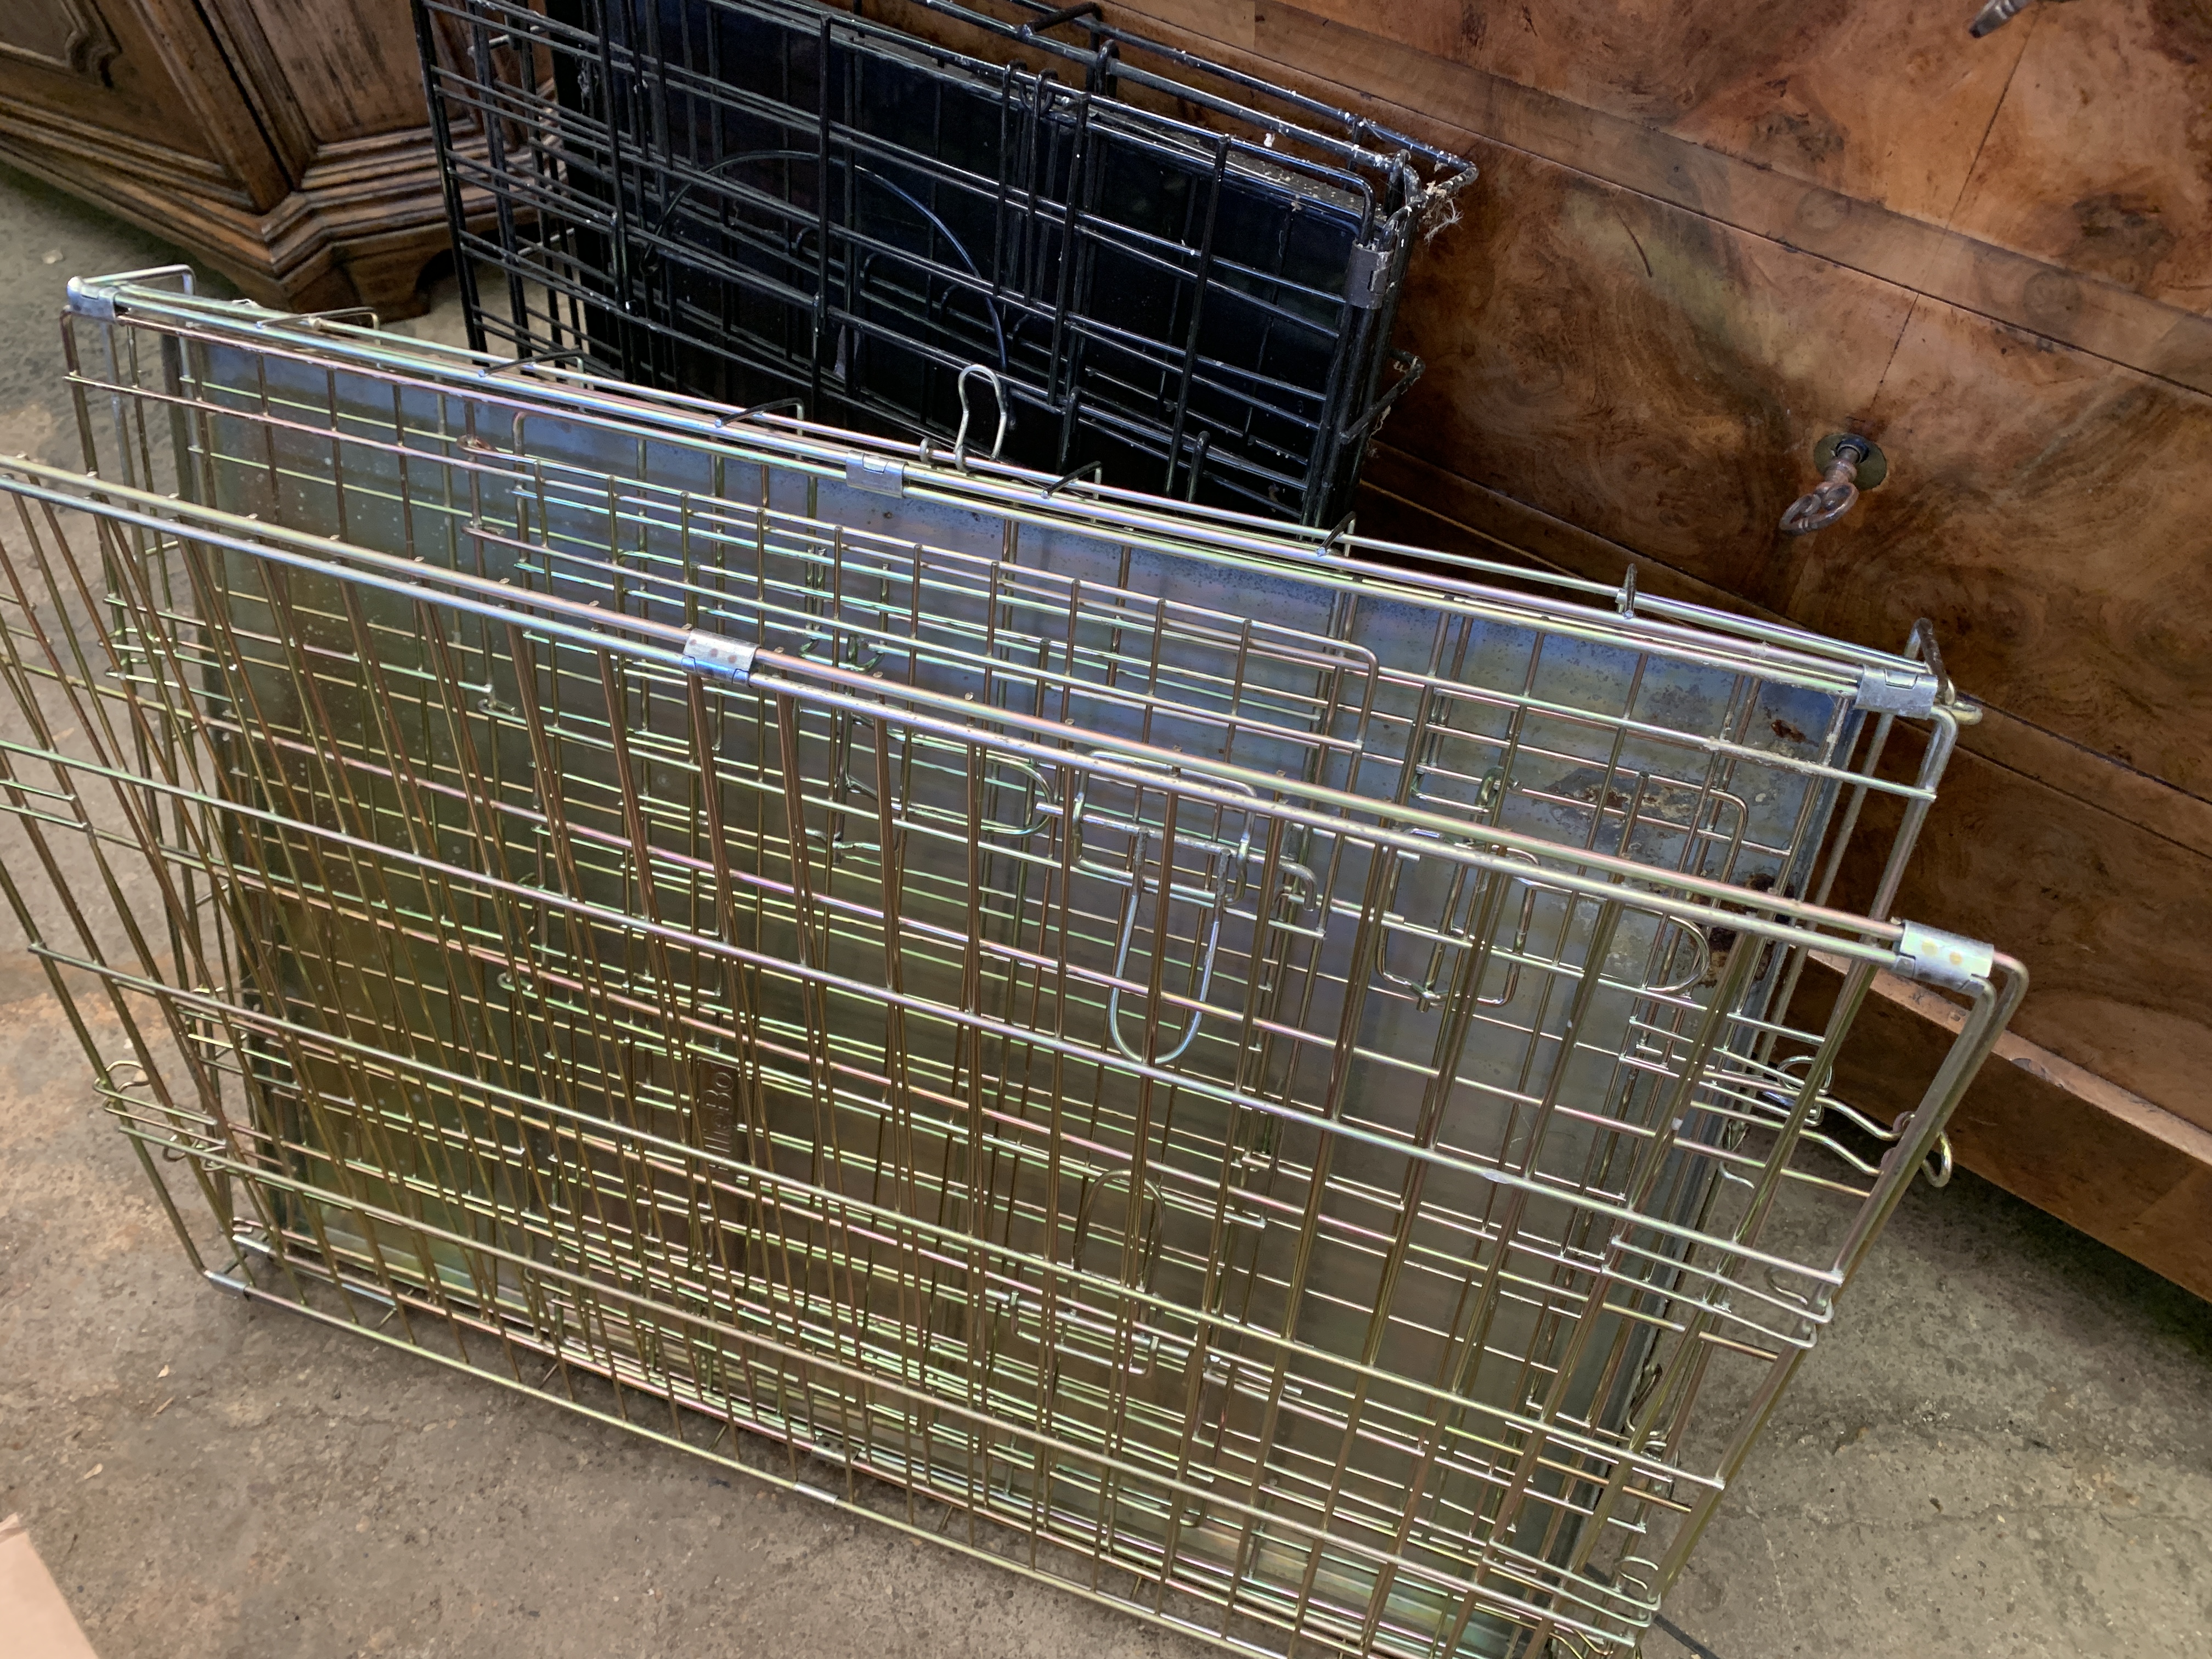 Two folding dog cages